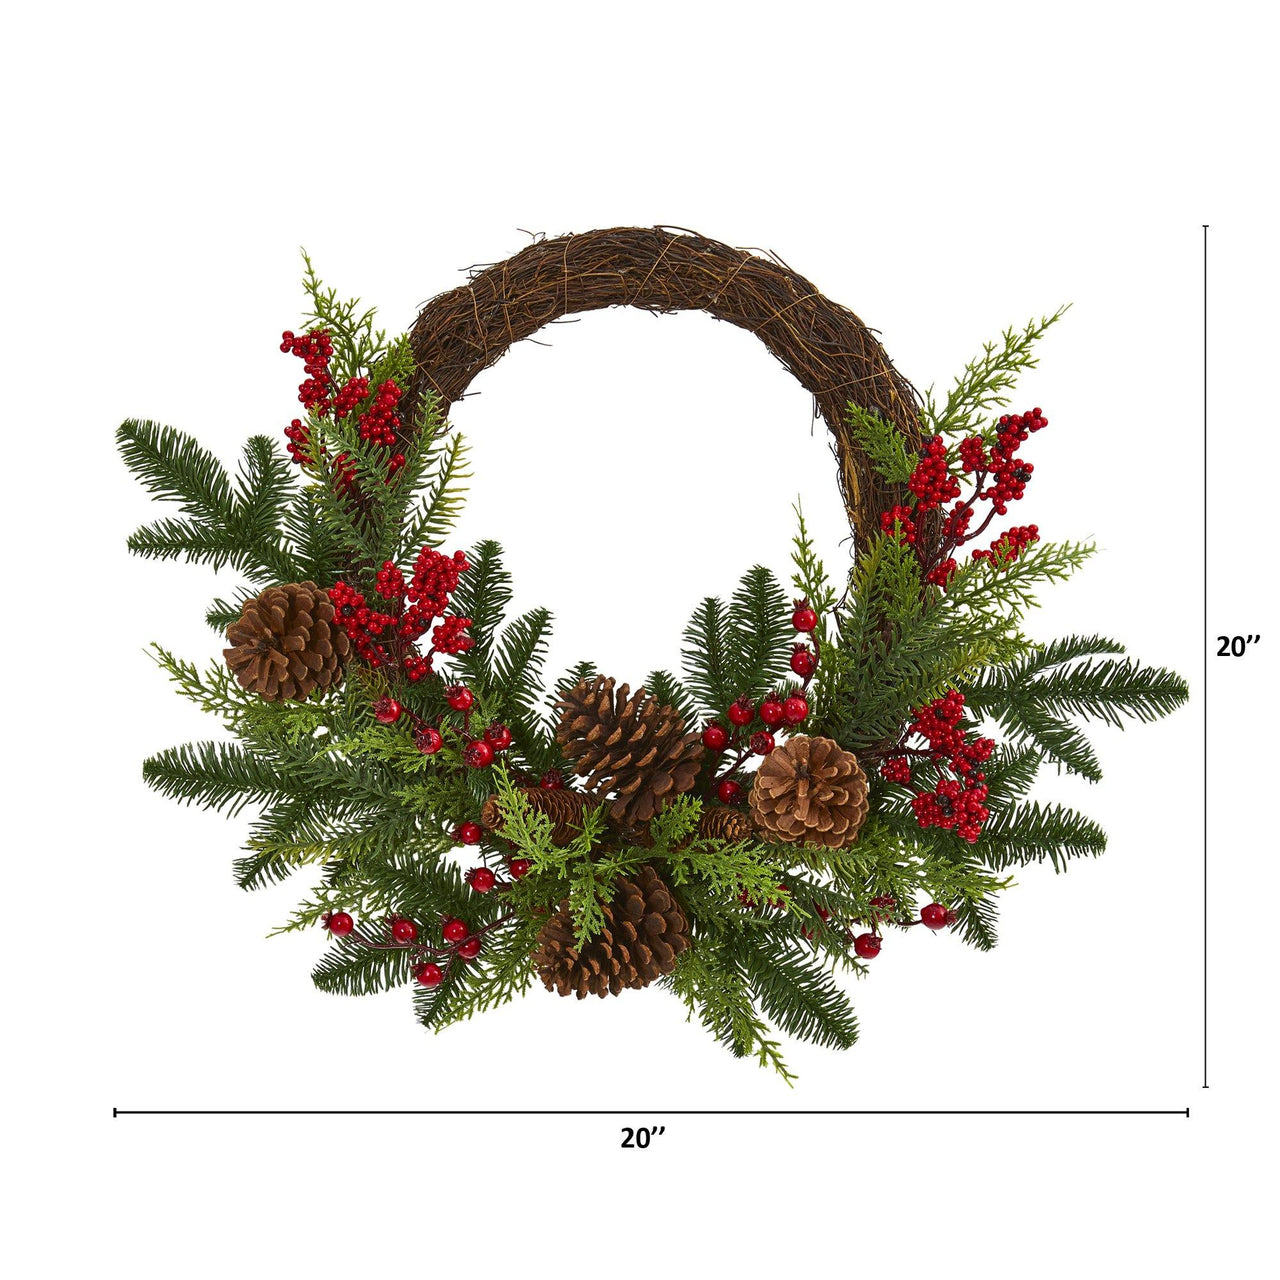 22” Mixed Pine and Cedar with Berries and Pine Cones Artificial Wreath - The Fox Decor